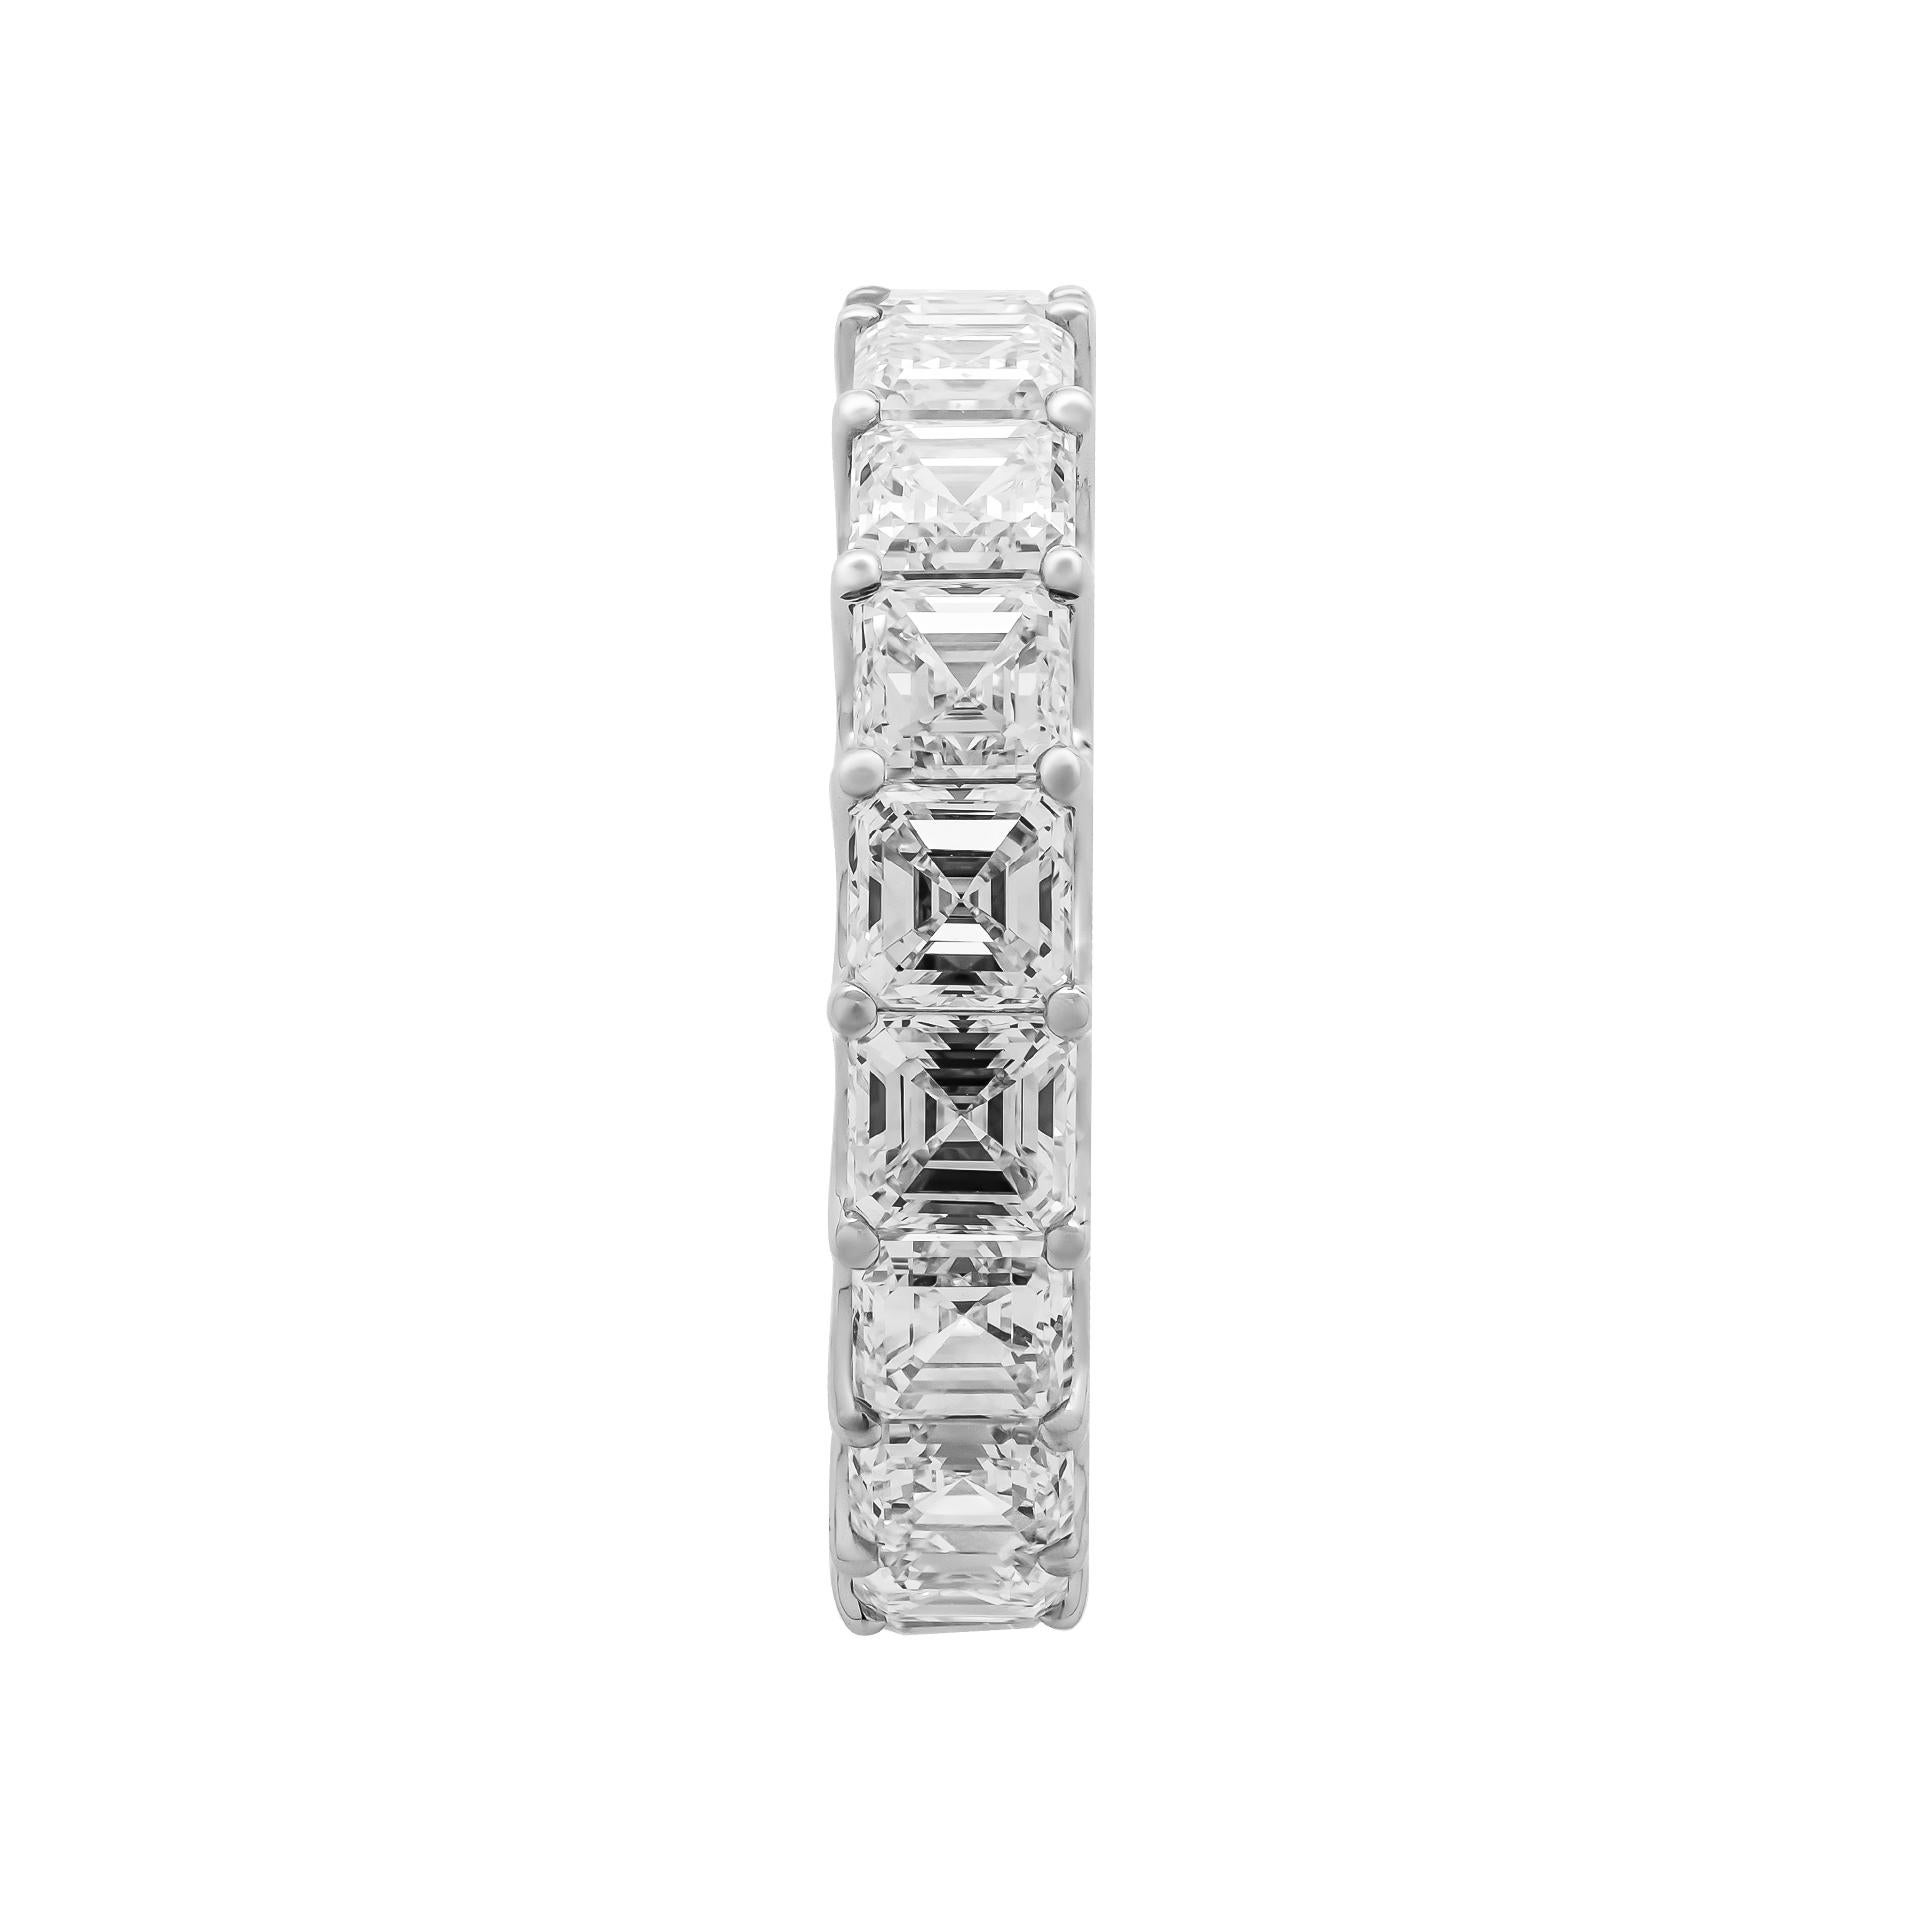 GIA Certified Anniversary eternity band with Square Emerald (Asscher) Diamonds set in Platinum 950; Size: 5 ¾ 
18stones 0.30ct each
Total Carat Weight: 5.48ct
All stones GIA Certified:
0.30ct F VVS1 GIA#2404957078 
0.30ct F VVS2 GIA#2407259526